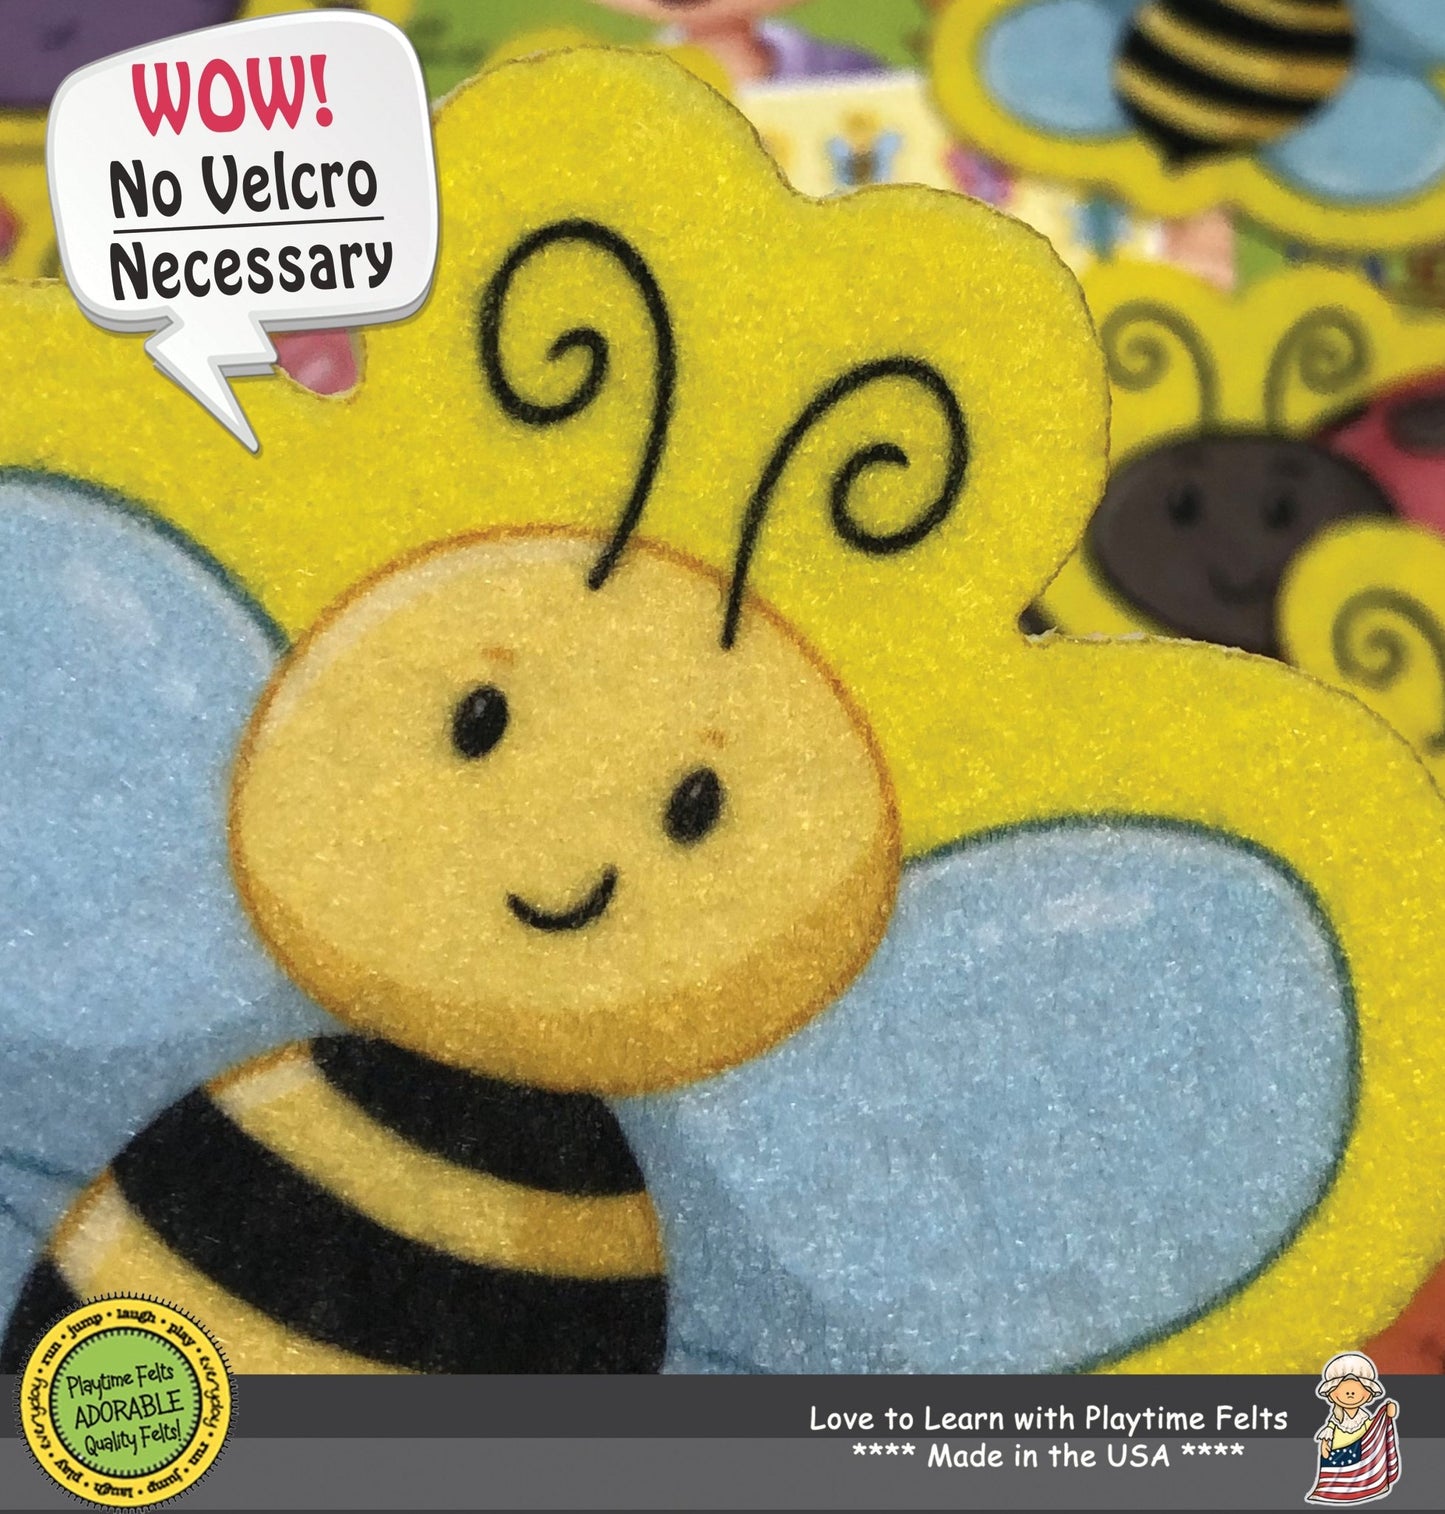 Spring Matching Bugs Felt Board Play Matching and Patterns - Felt Board Stories for Preschool Classroom Playtime Felts